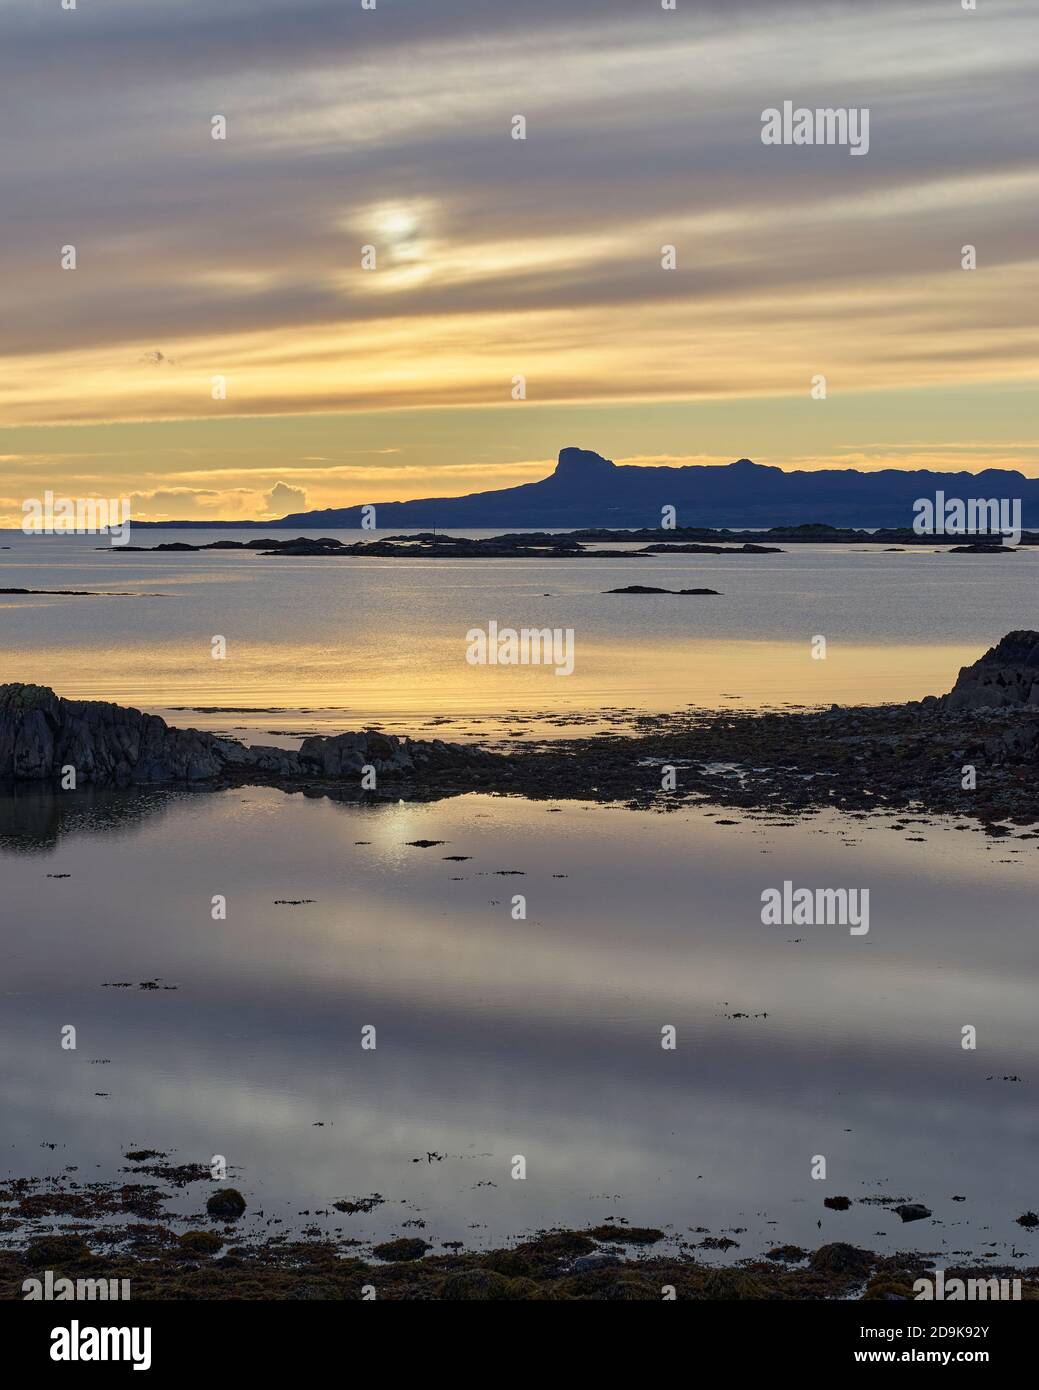 Sunset over the Isle of Eigg in the Small Isles, viewed from the Rhu Peninsula, Arisaig, Lochaber, Highland, Scotland. Stock Photo